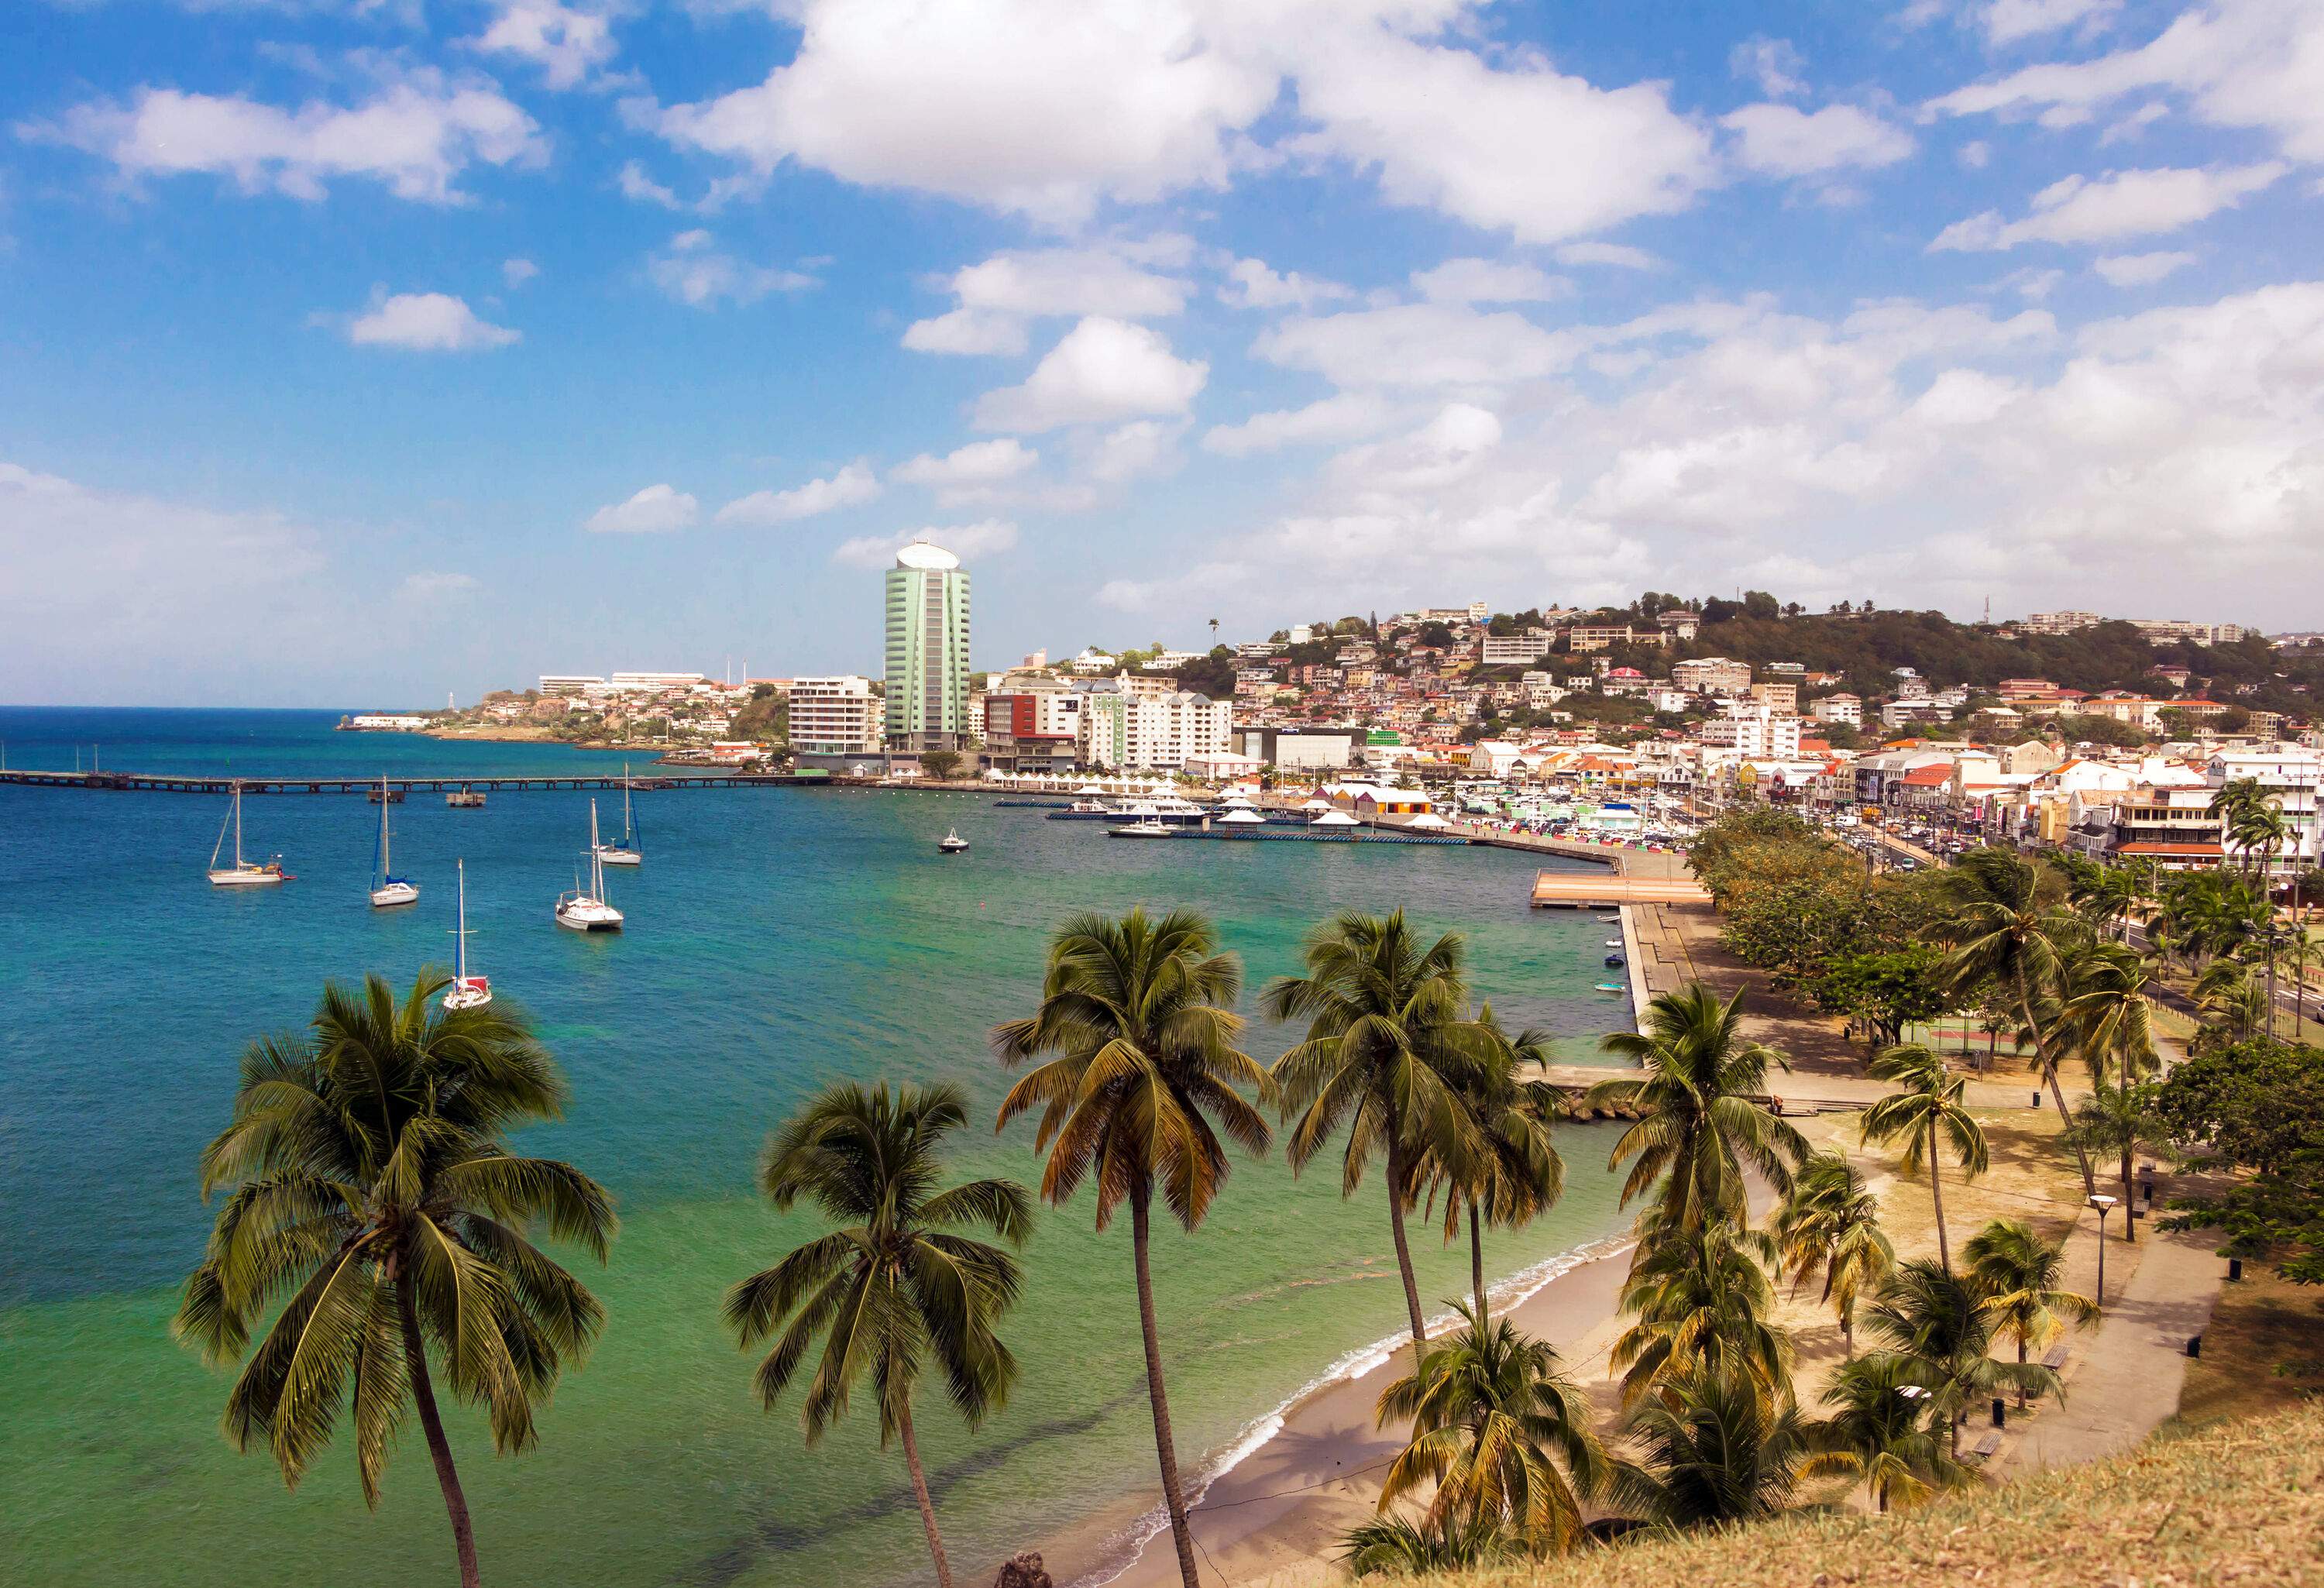 A populous seaside city perched on a hill overlooking a bay with tranquil clear waters surrounded by palm trees.